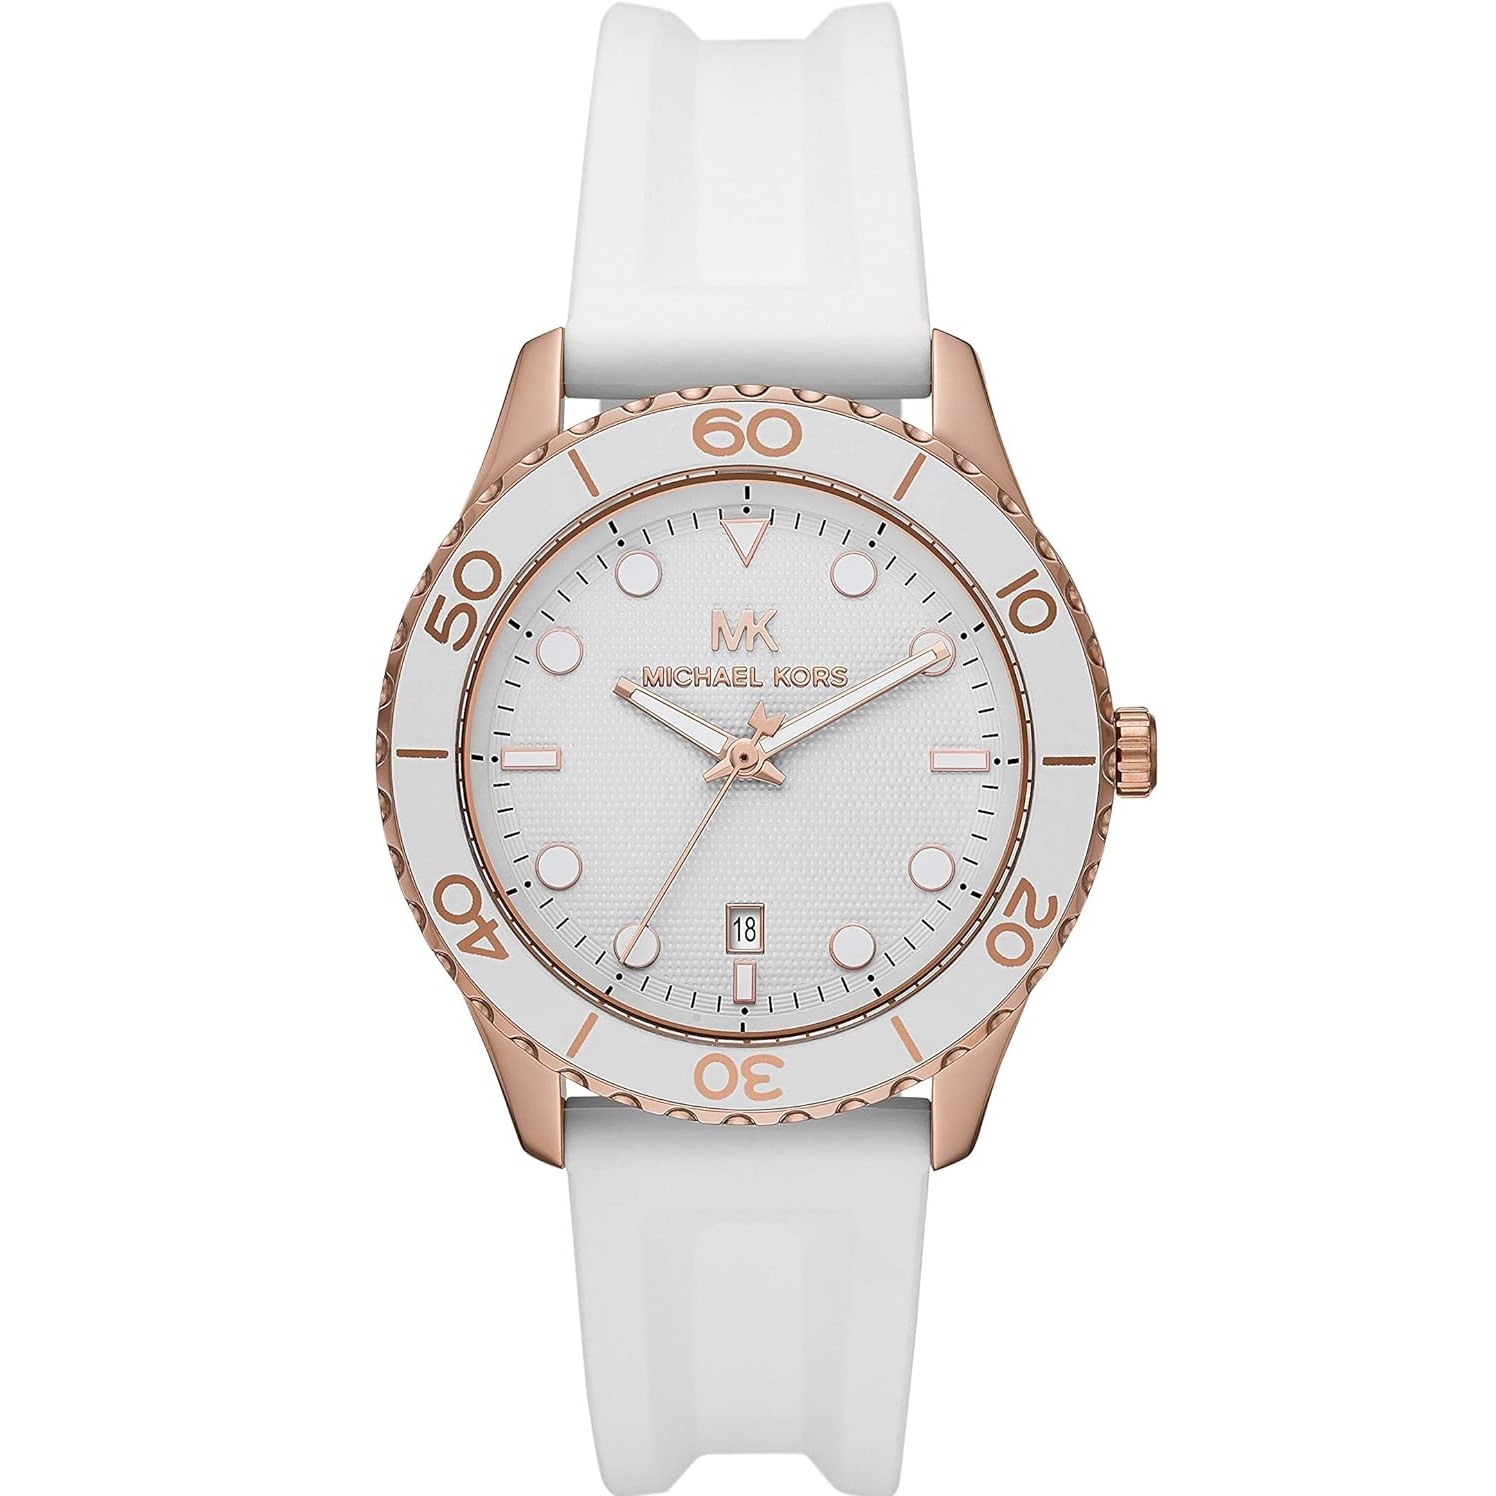 ĐỒNG HỒ ĐEO TAY MICHAEL KORS RUNWAY DIVE OVERSIZED ROSE GOLD-TONE SILICONE STRAP WATCH MK6853 6